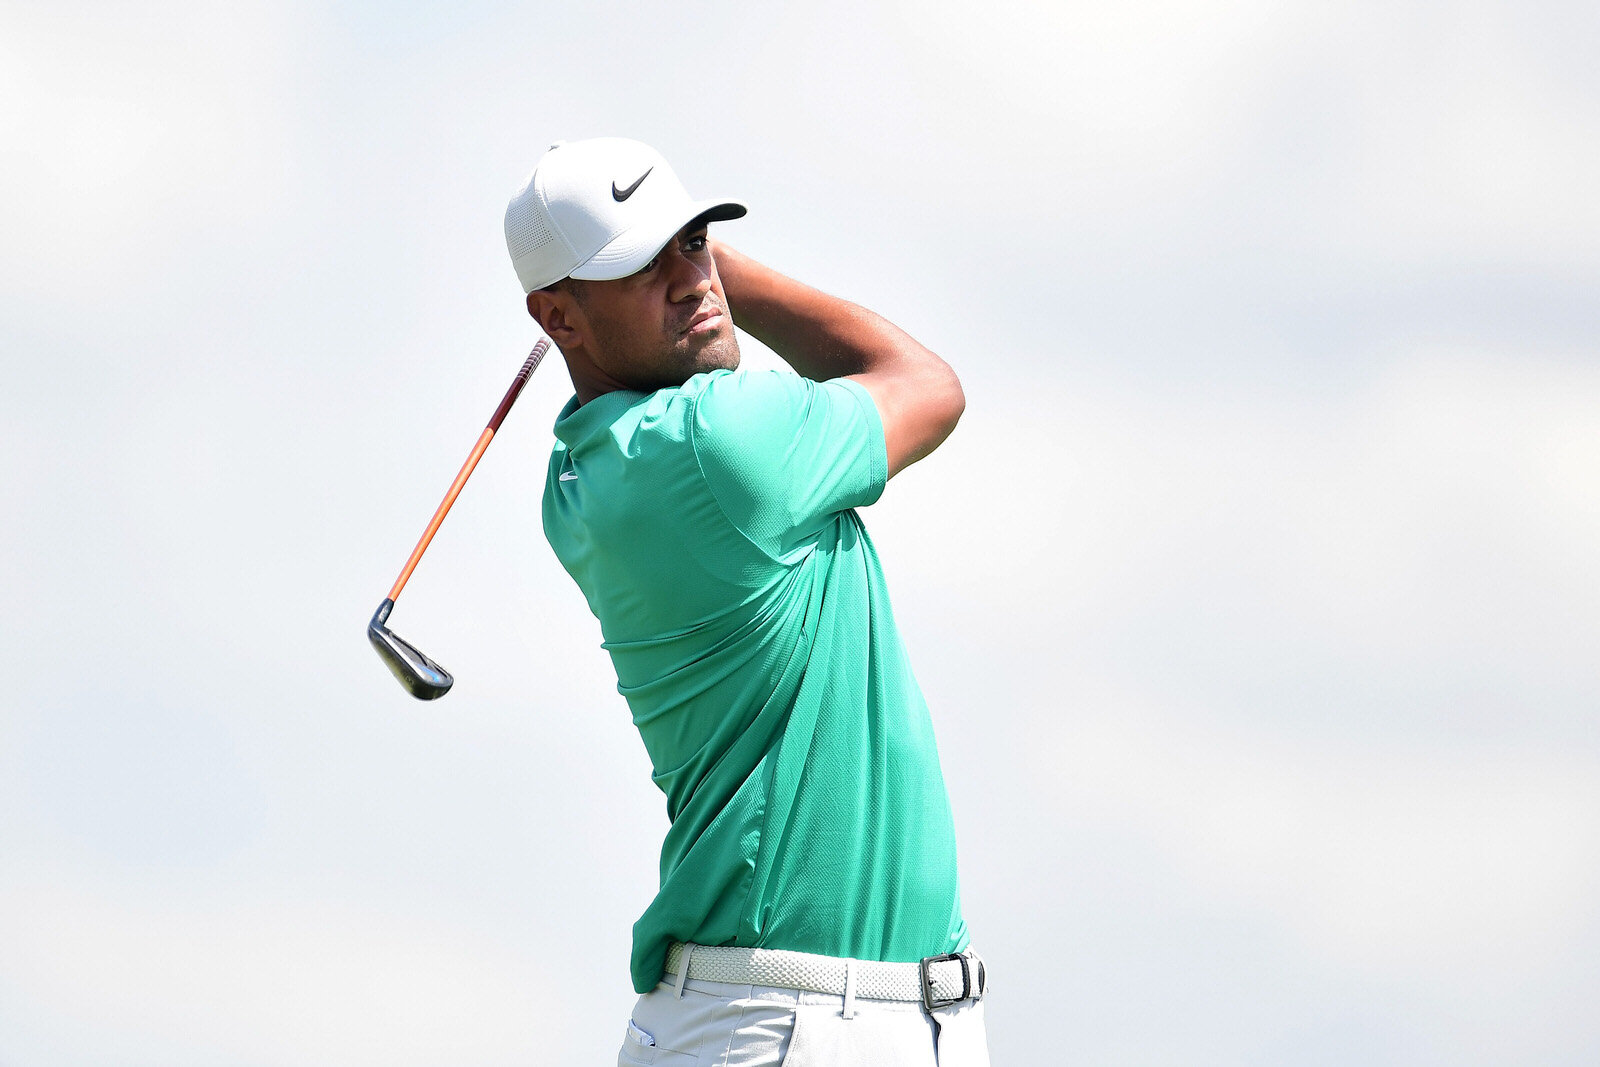  BLAINE, MINNESOTA - JULY 24: Tony Finau of the United States plays his shot from the seventh tee during the second round of the 3M Open on July 24, 2020 at TPC Twin Cities in Blaine, Minnesota. (Photo by Stacy Revere/Getty Images) 